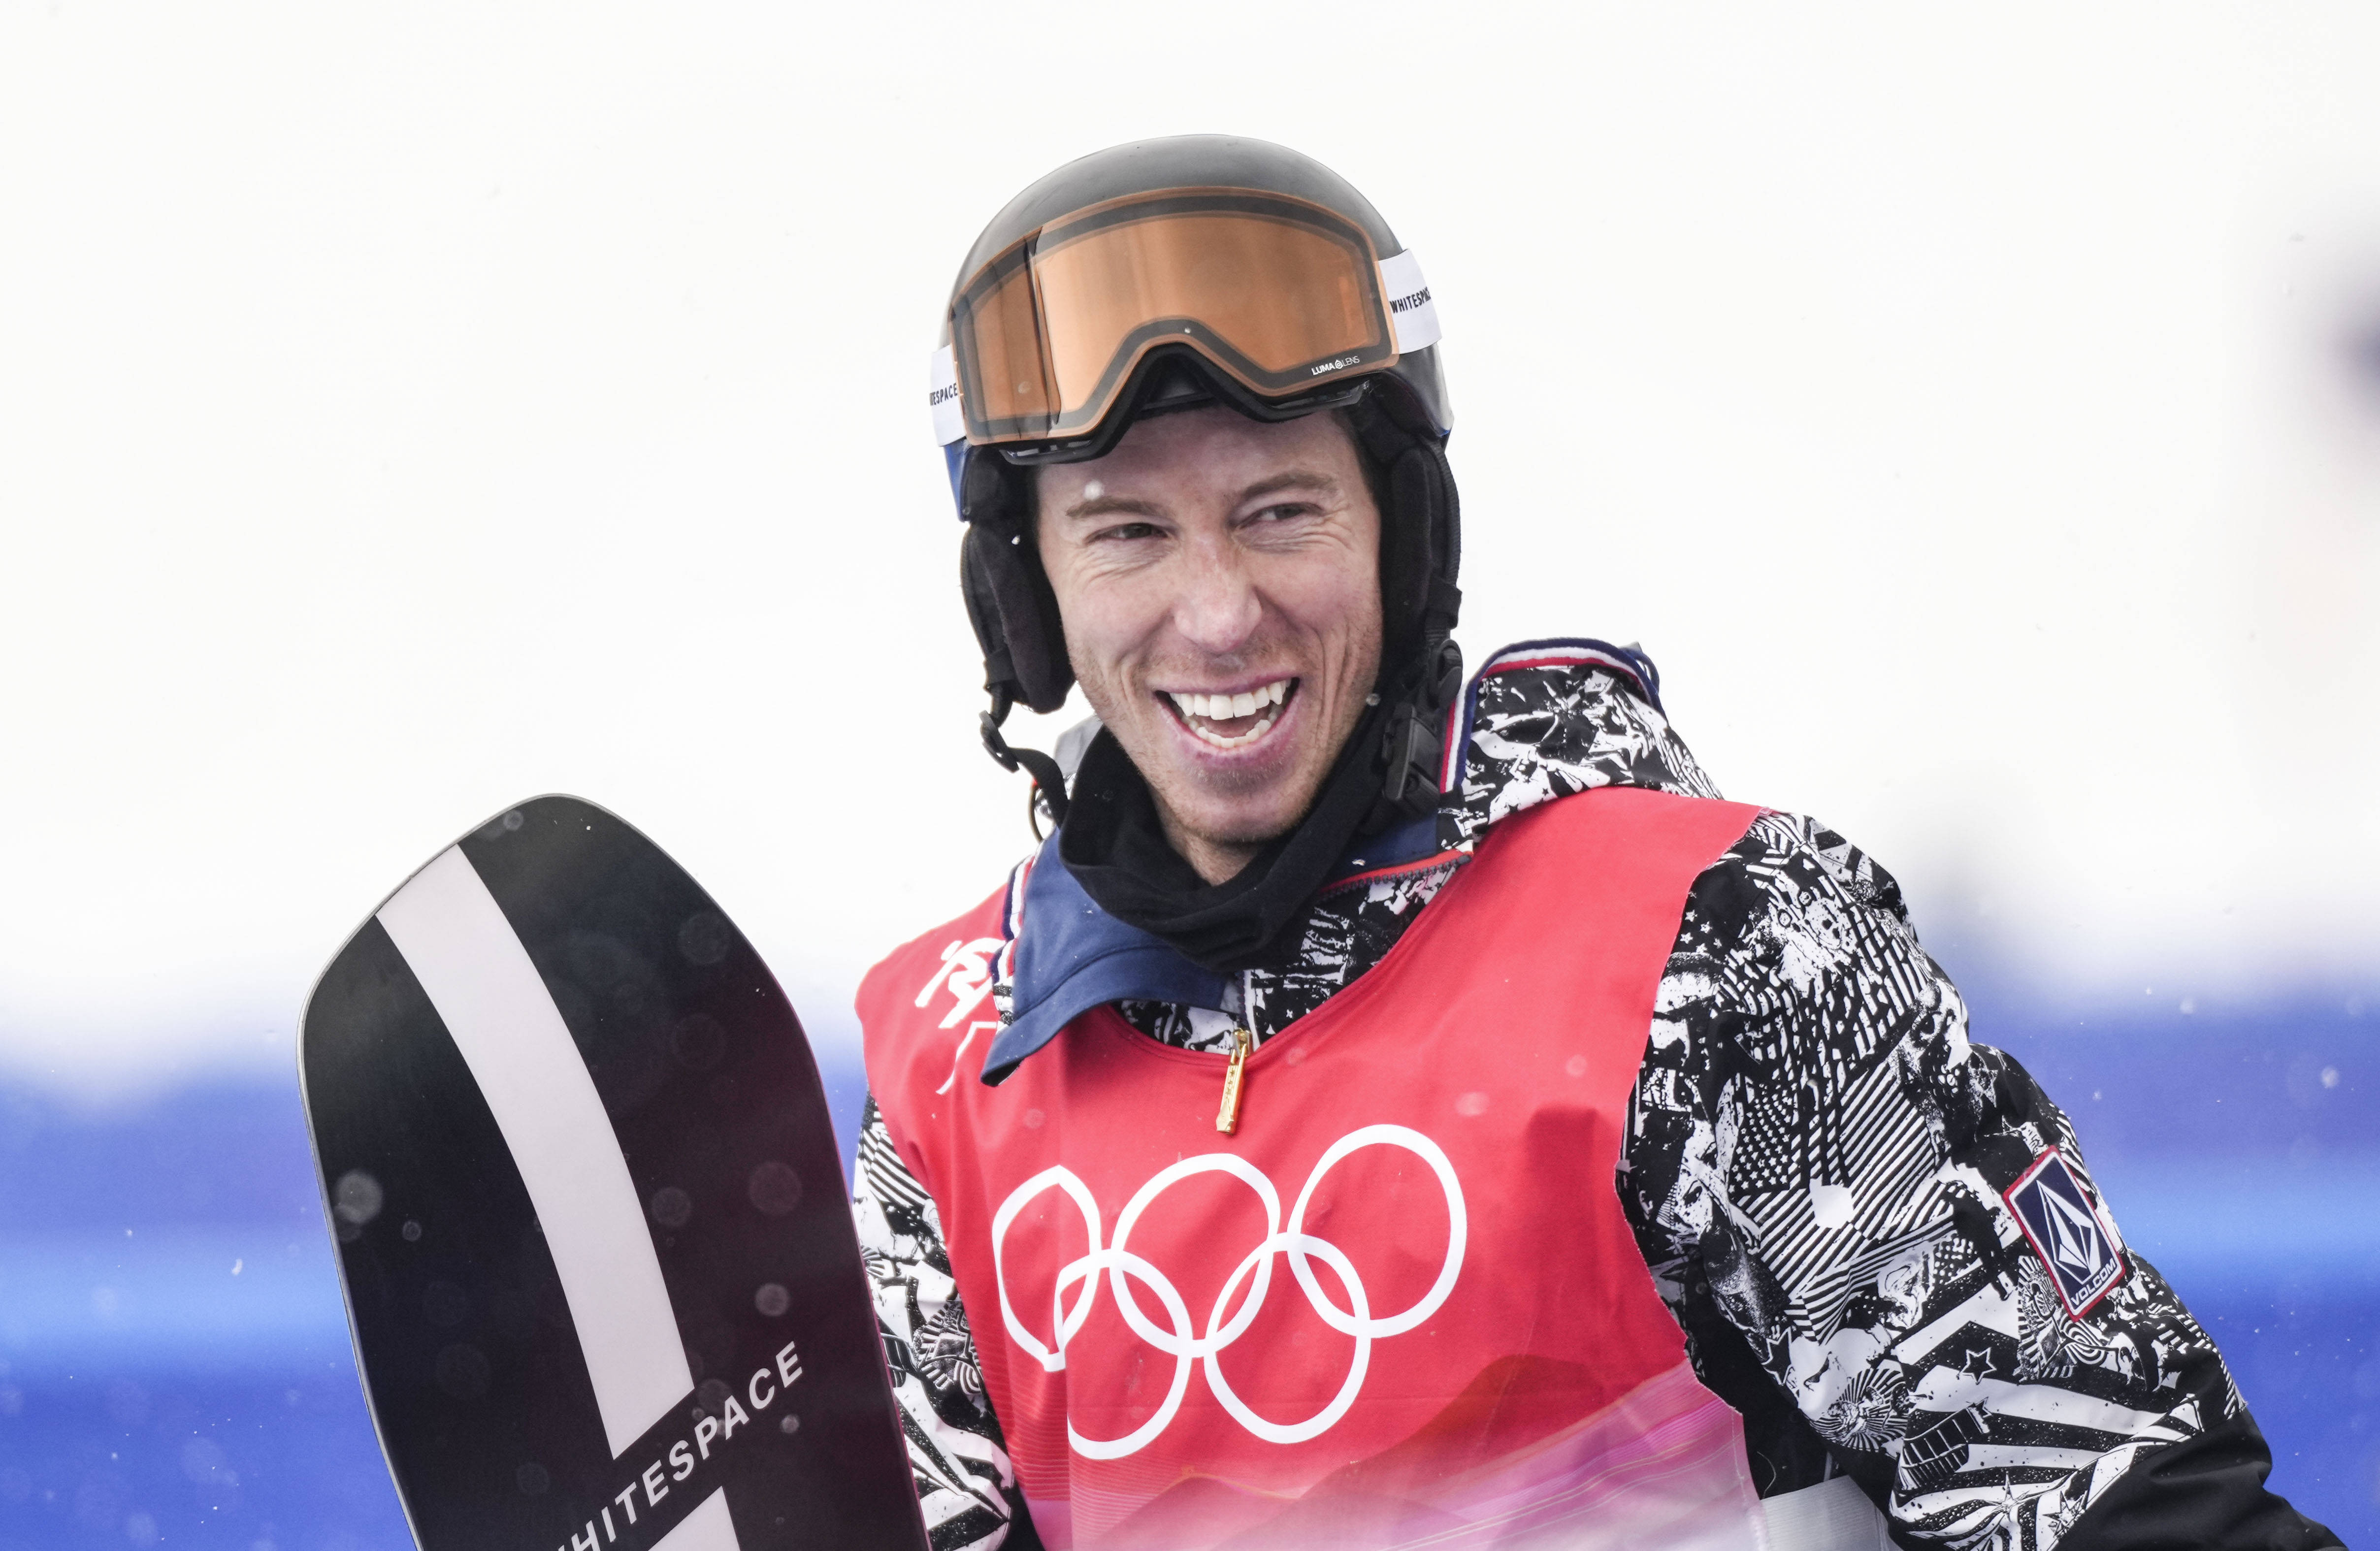 Best Snowboarder for US, Shaun White, Won't Win Any Olympic Medials